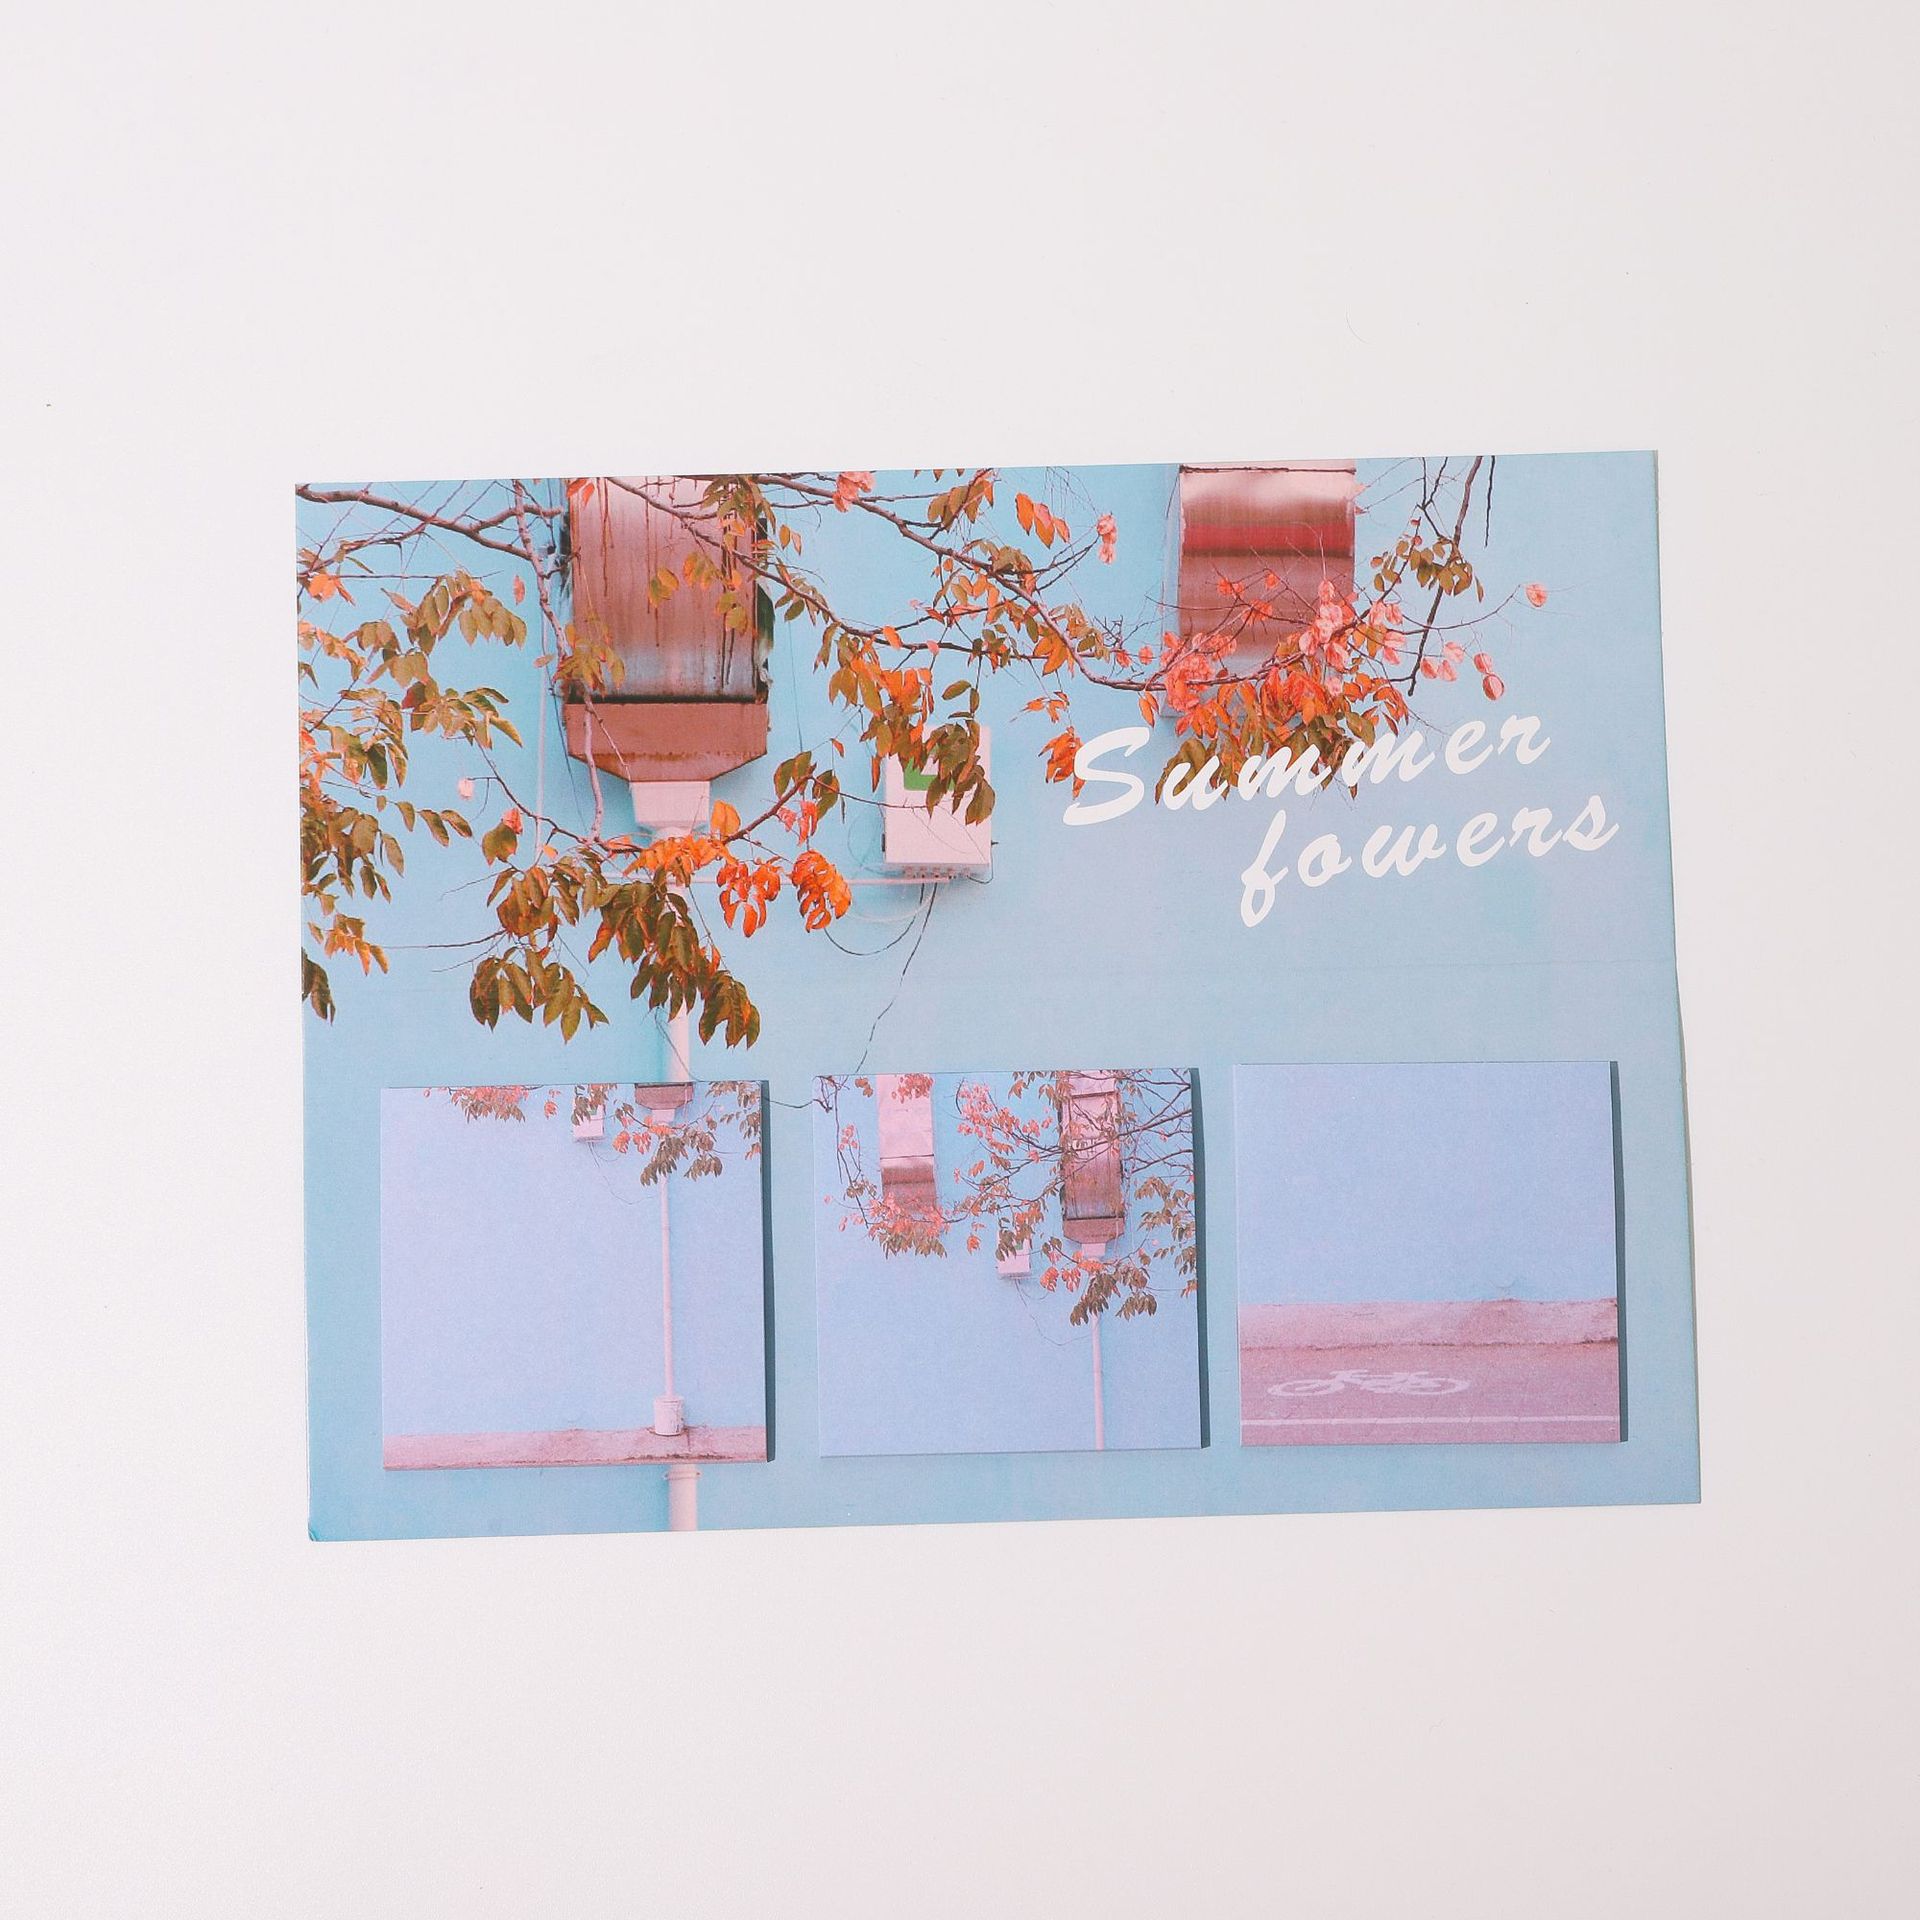 Life Is Like Summer Flowersins scenery sticky note the republic of korea originality N times paste student Hand account diy decorate source material Leaving a message. Notes Note Paper